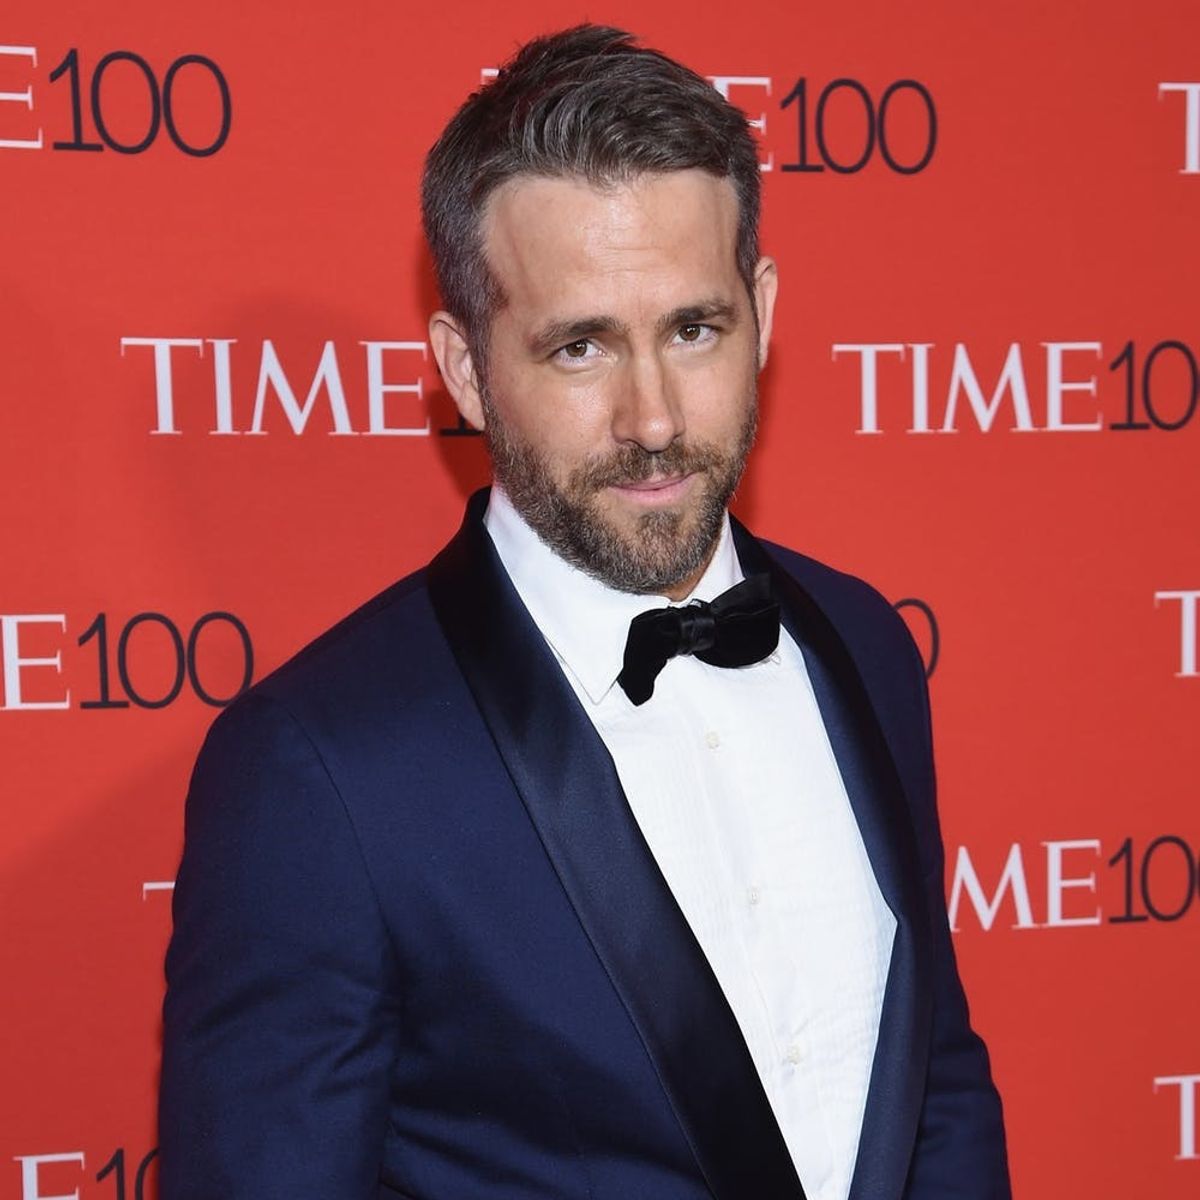 Ryan Reynolds Will Play Detective Pikachu in the Live-Action Pokémon Movie